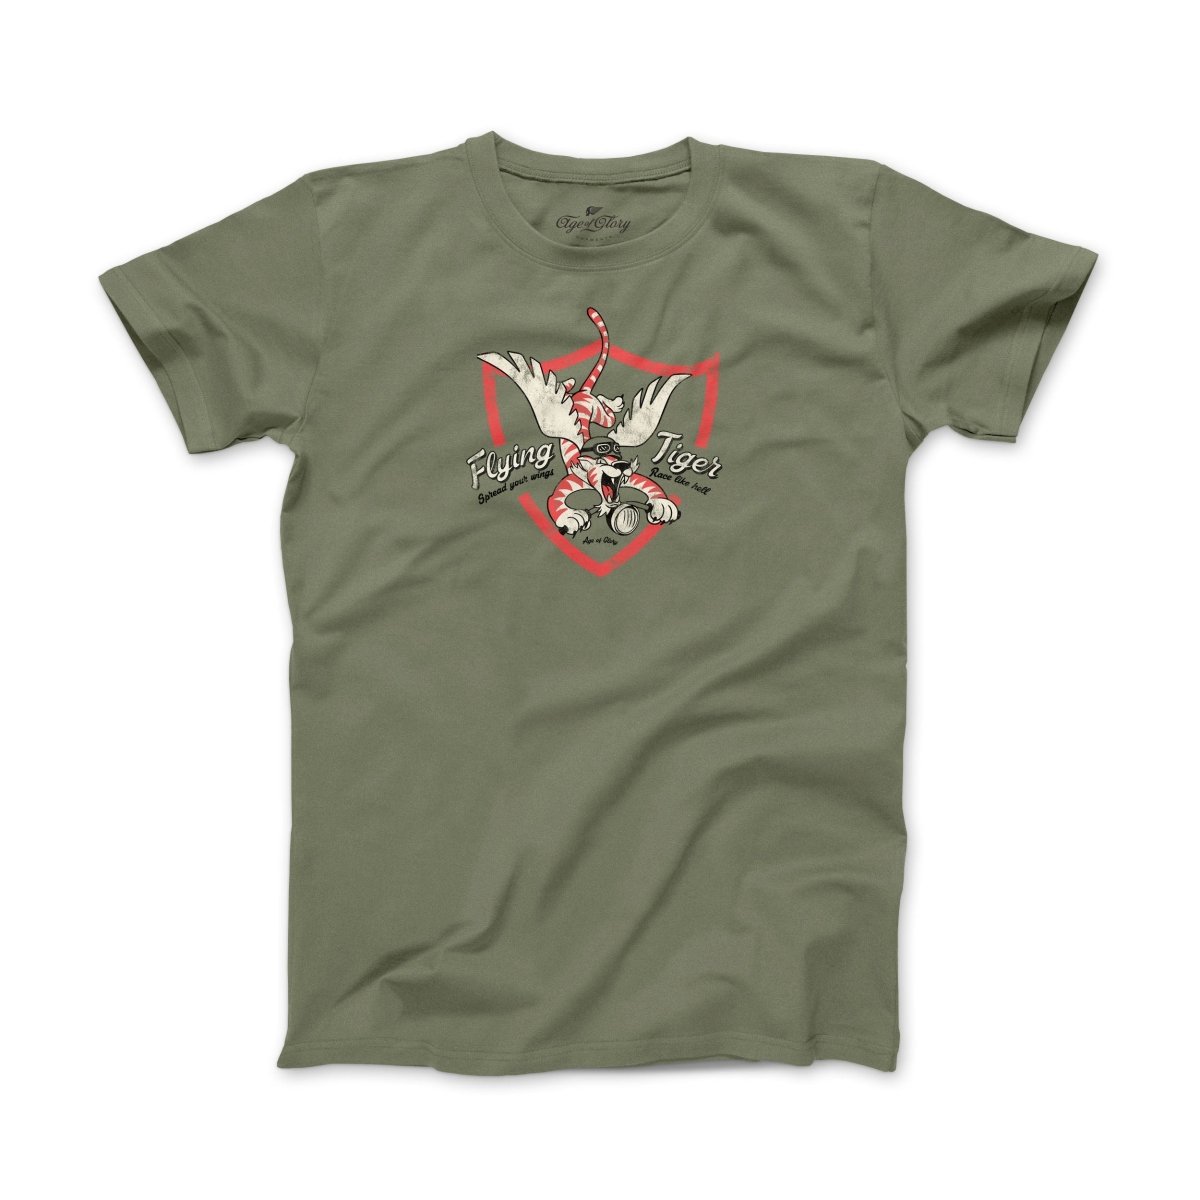 Age of Glory Flying Tiger T-shirt in Green